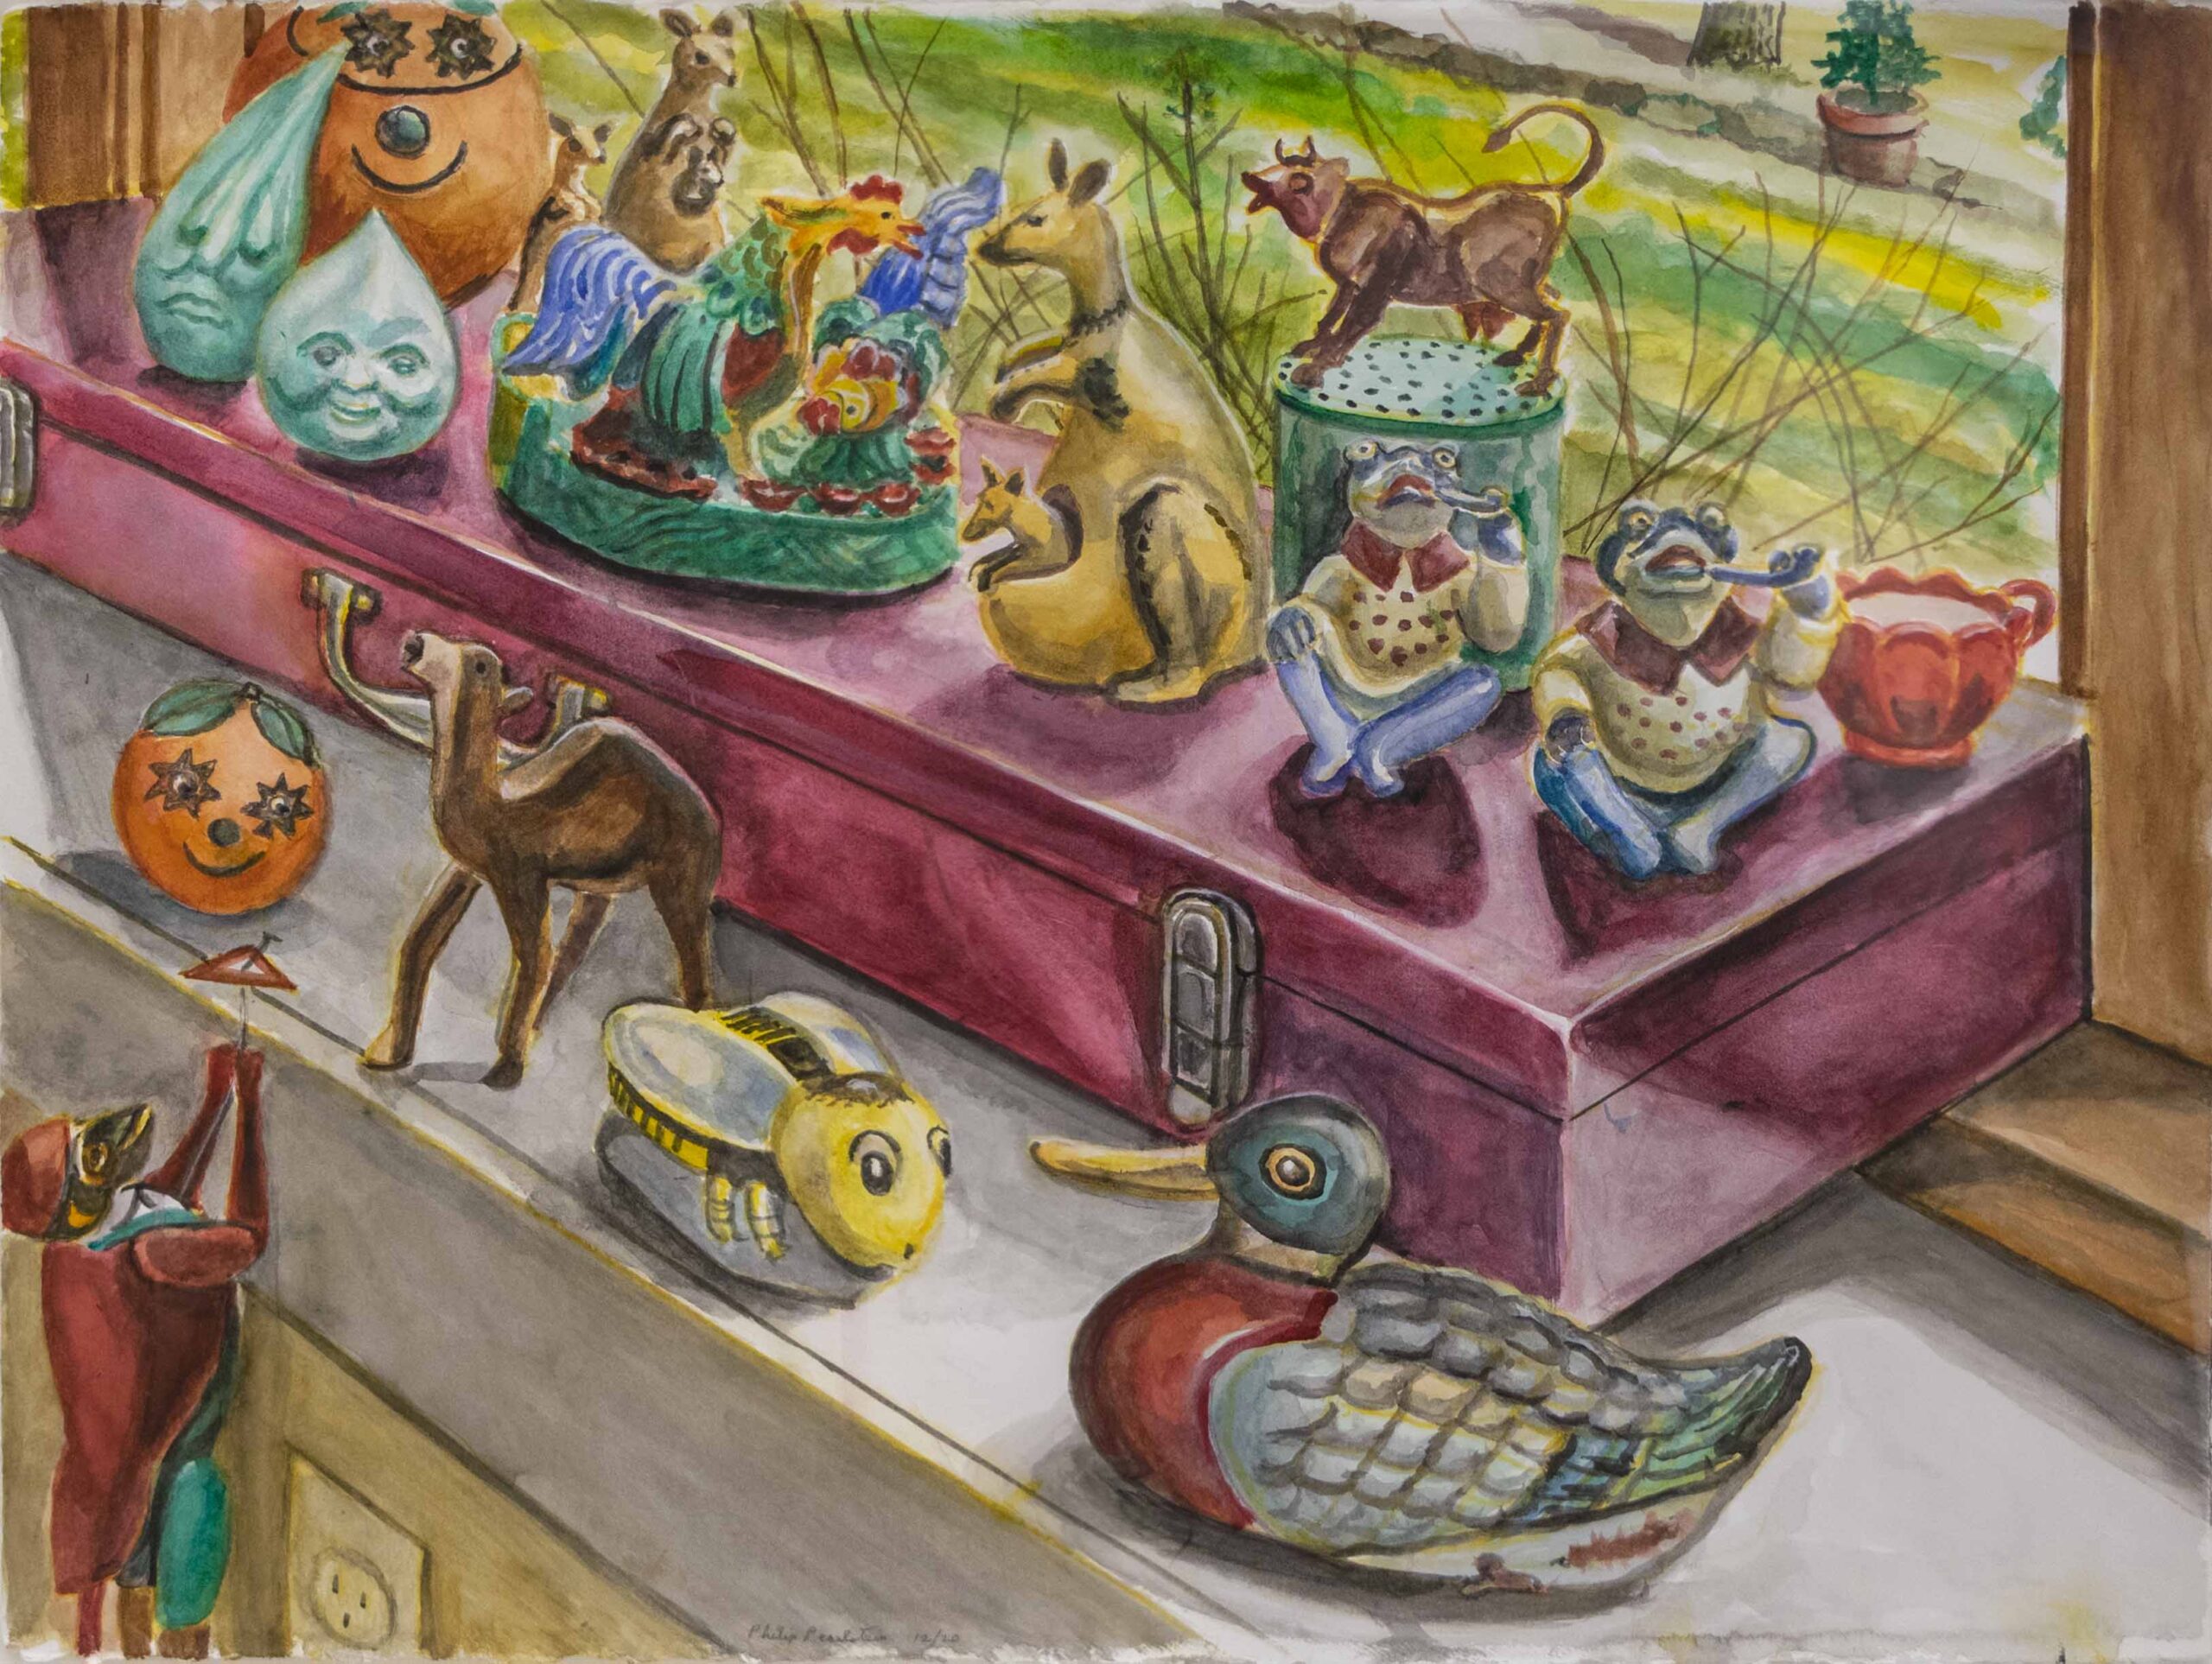 2021 Salt Pepper Shakers and Some Toys on BBQ Toolbox Watercolor on Paper 24 x 30 PP16957